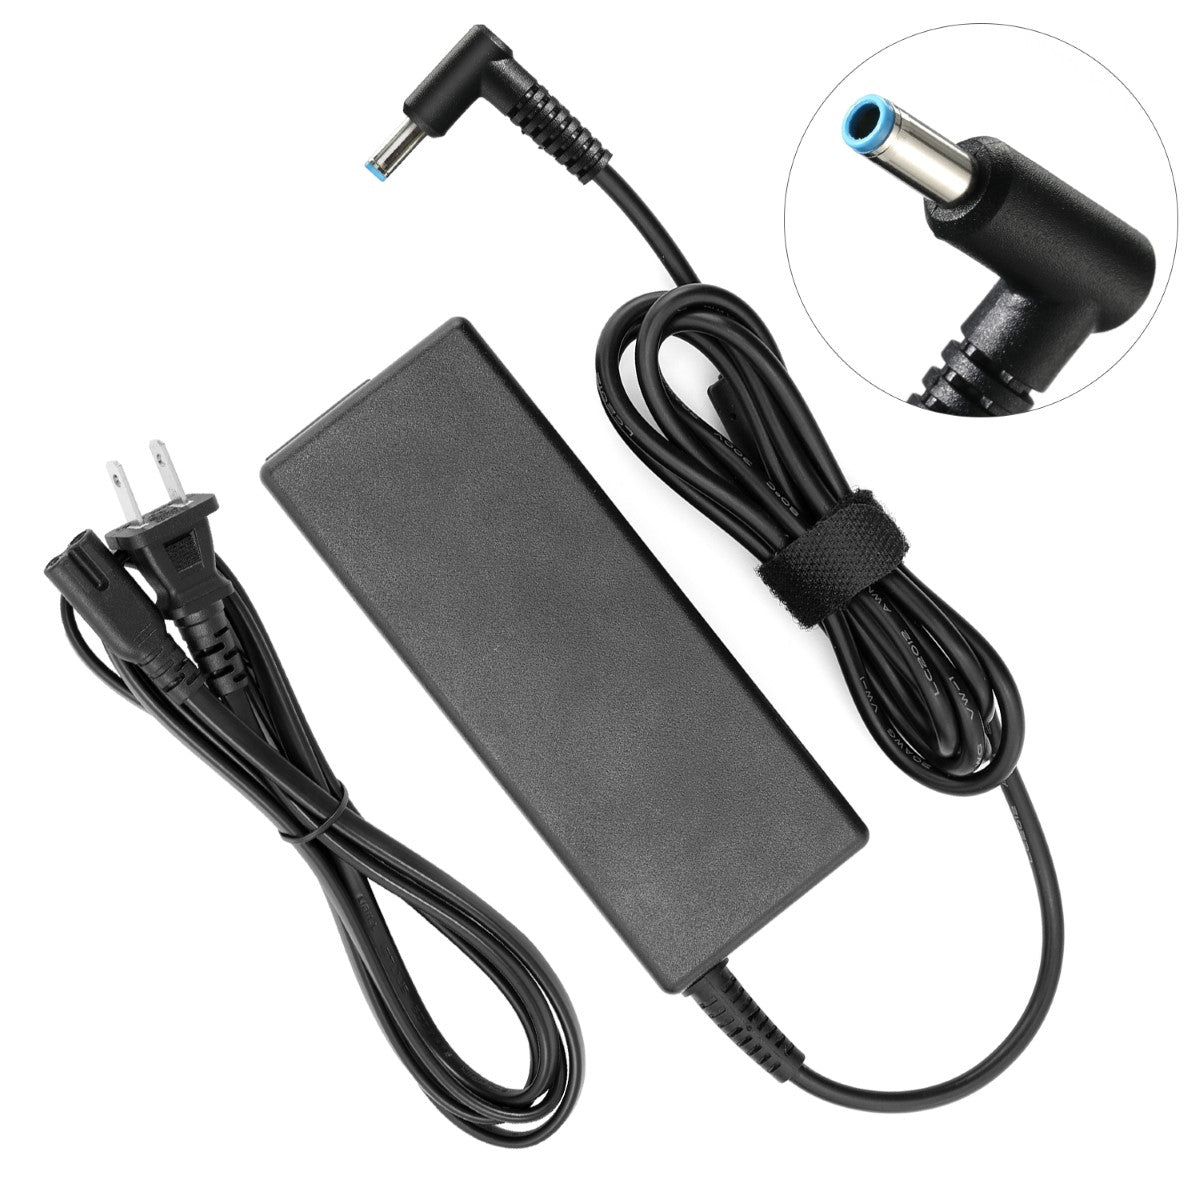 AC Adapter Charger for hp Envy Touchsmart 15t-k100 Notebook.